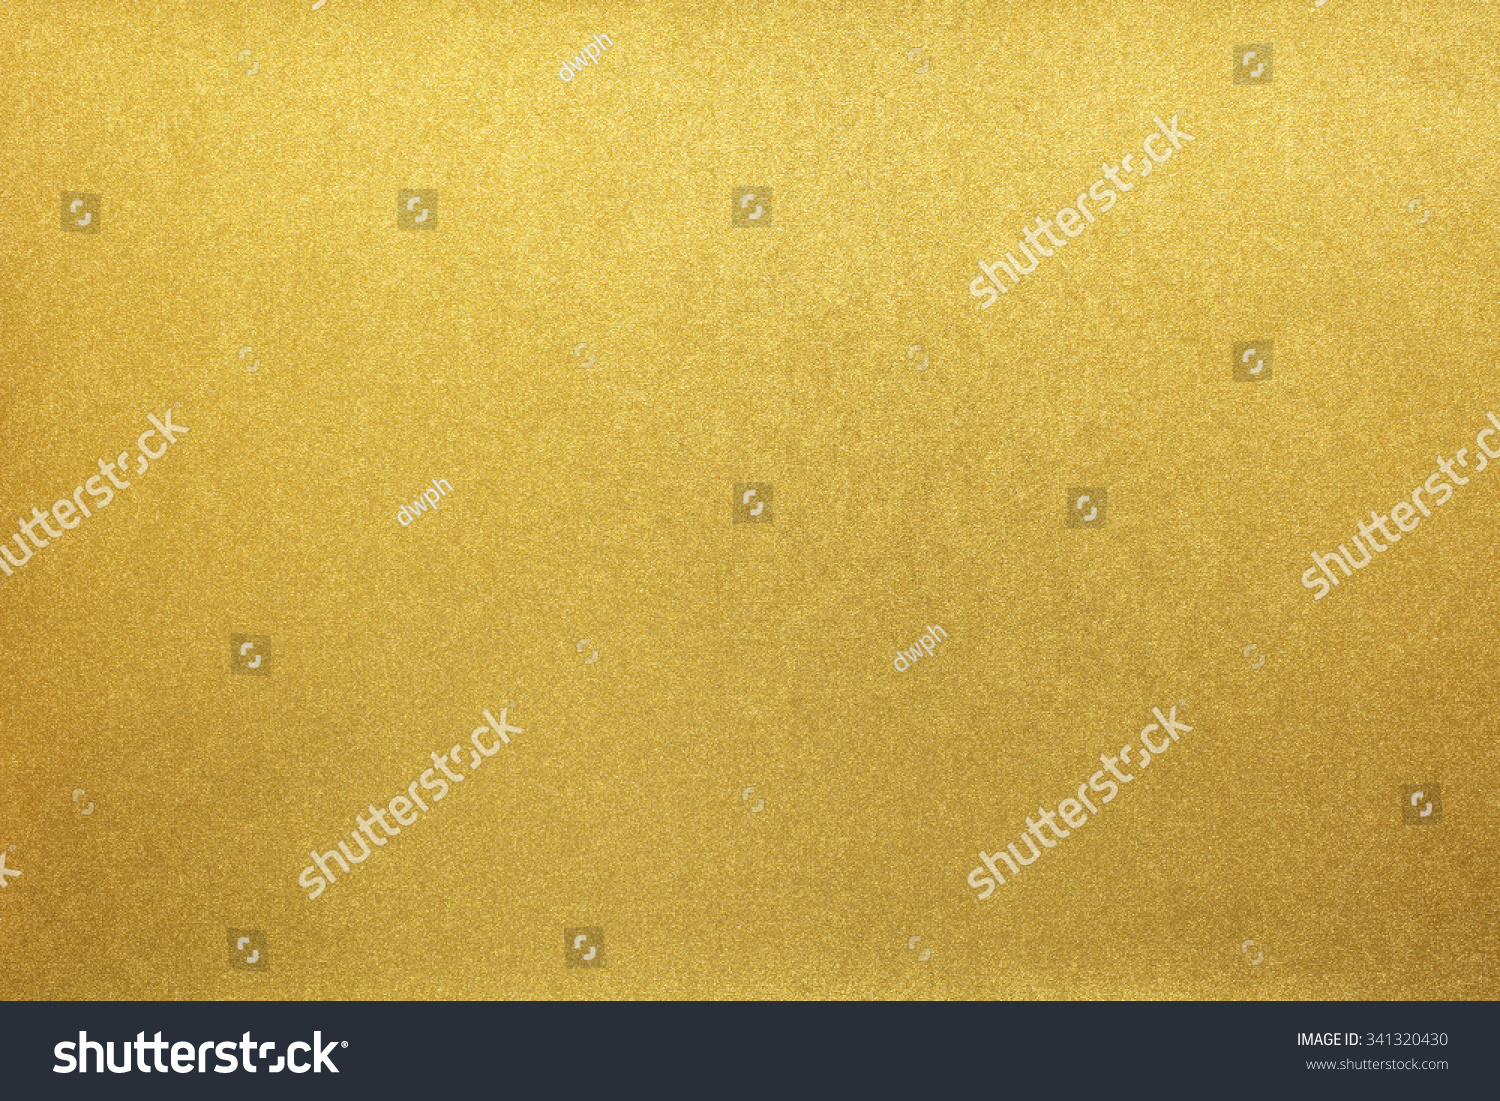 Gold paper texture background #341320430